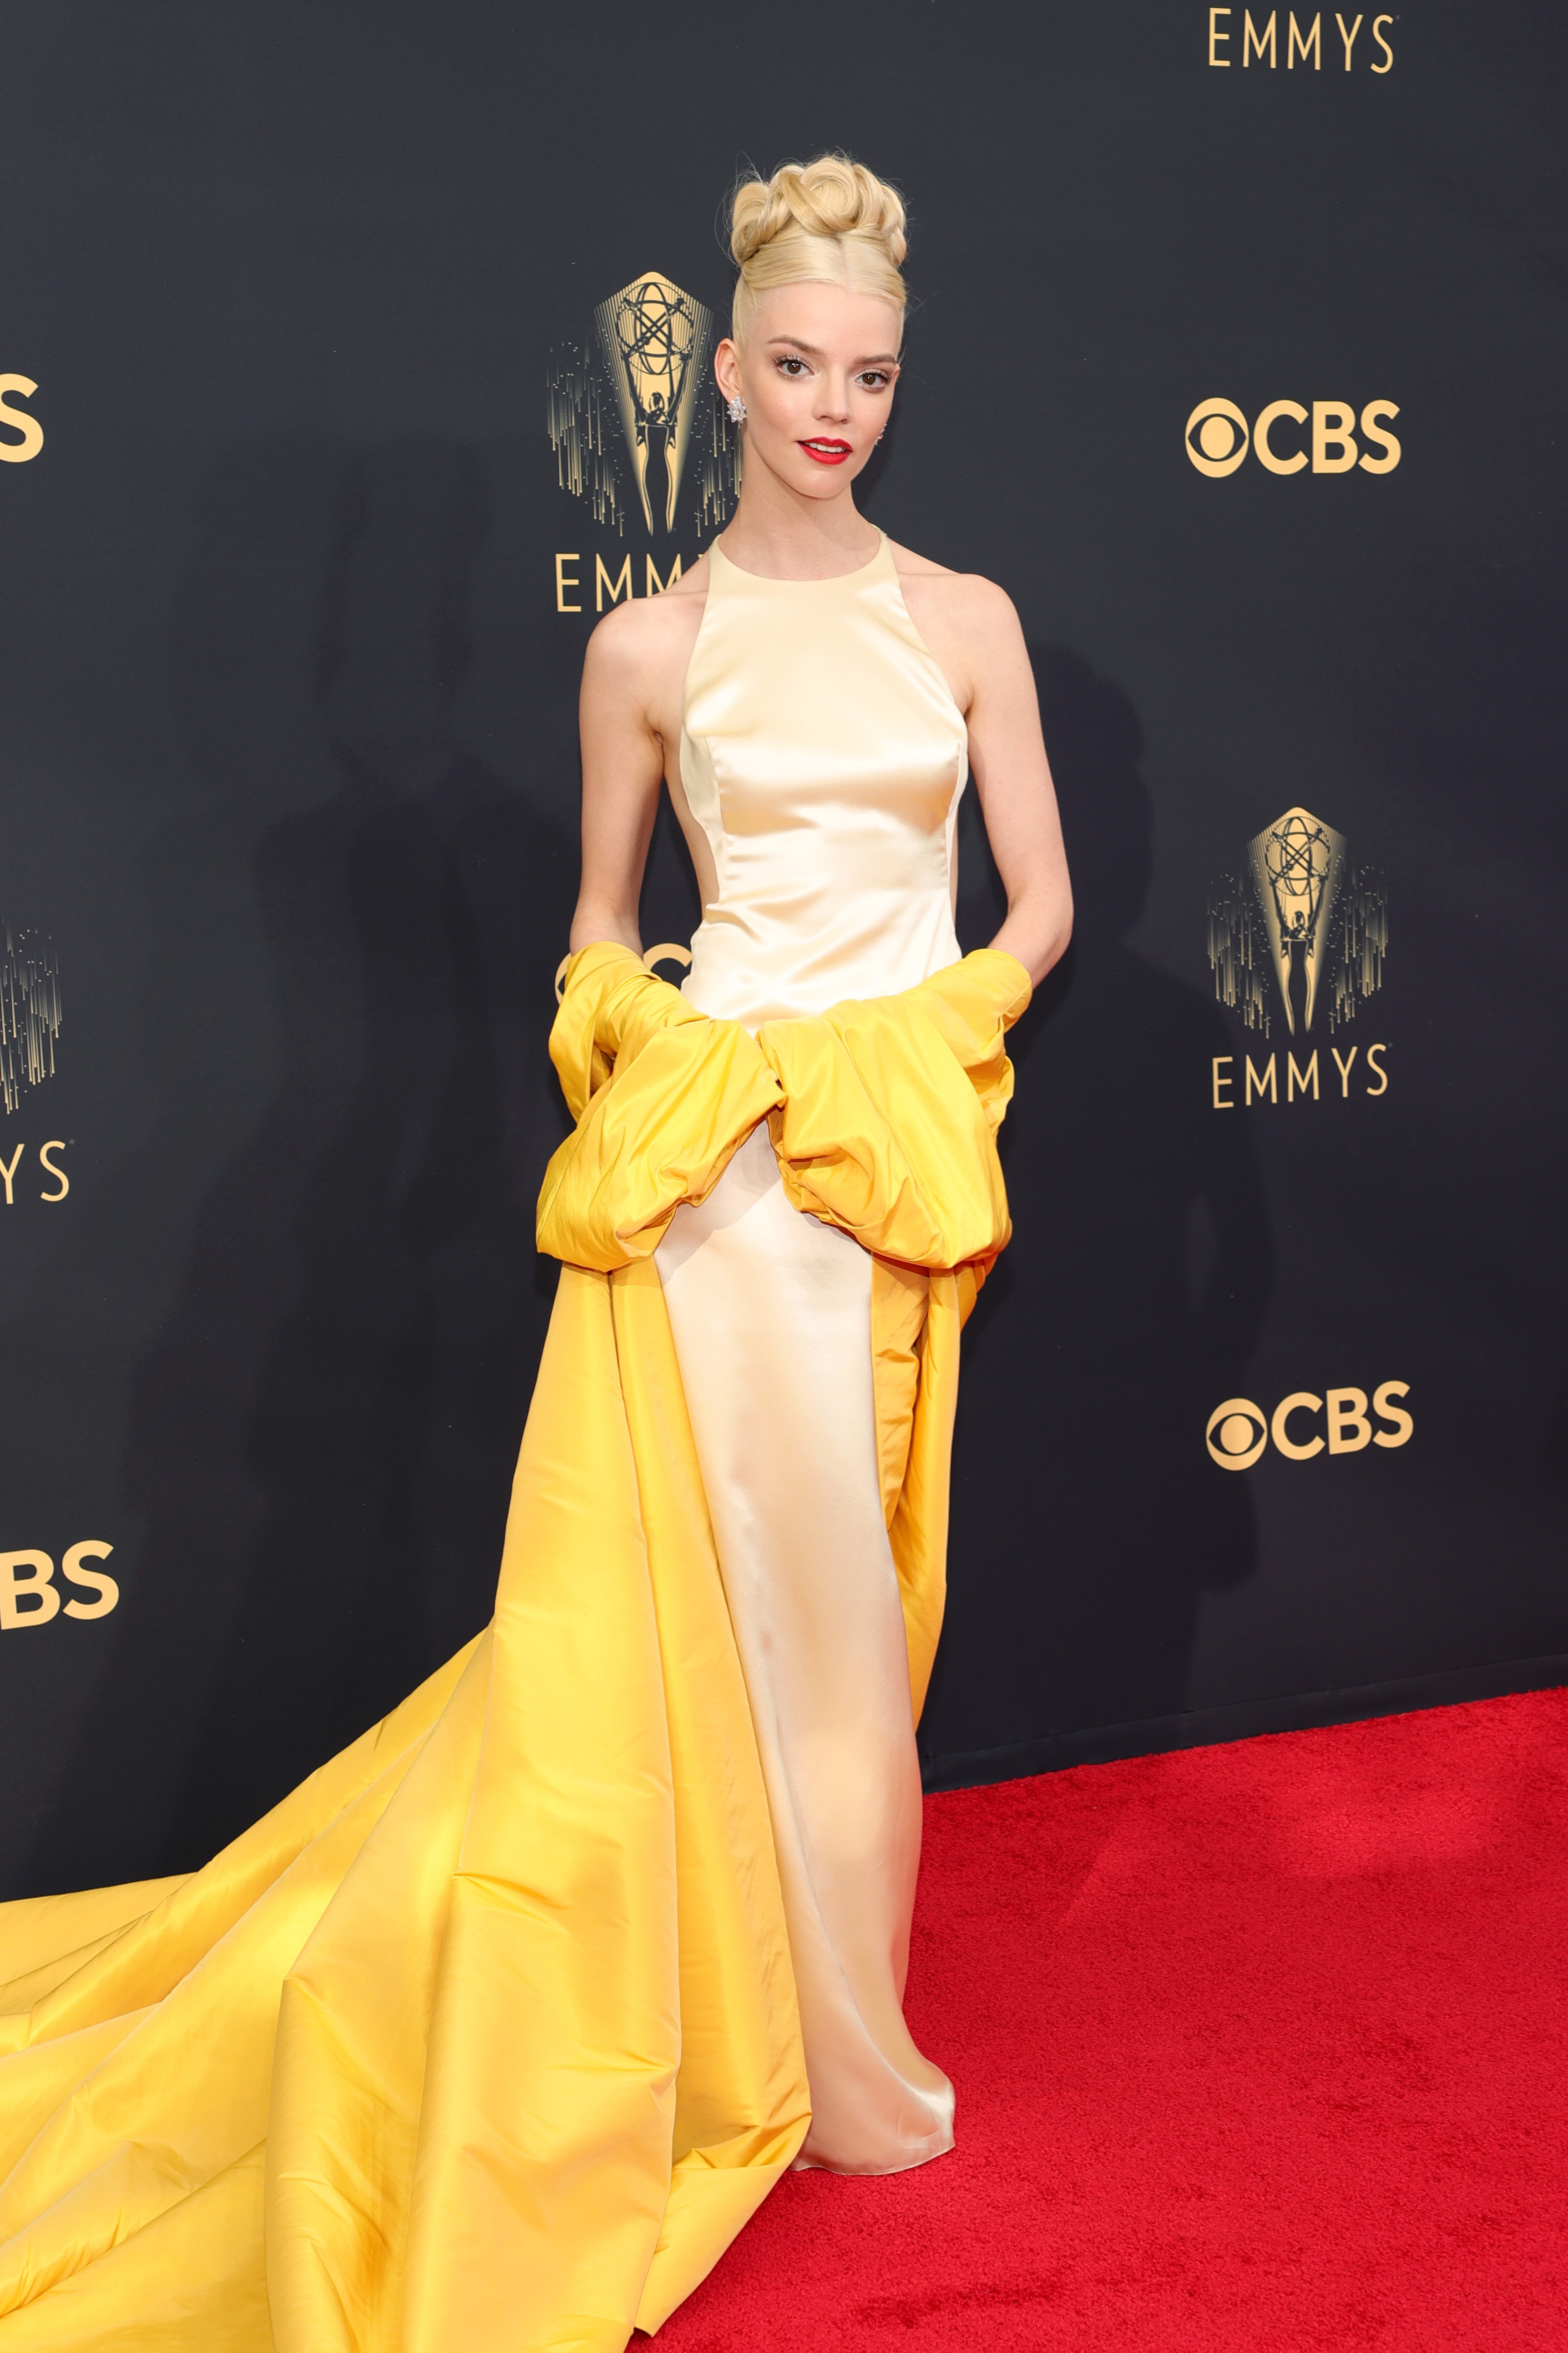 LOS ANGELES, CALIFORNIA - SEPTEMBER 19: Anya Taylor-Joy attends the 73rd Primetime Emmy Awards at L.A. LIVE on September 19, 2021 in Los Angeles, California. (Photo by Rich Fury/Getty Images) (Foto: Getty Images)